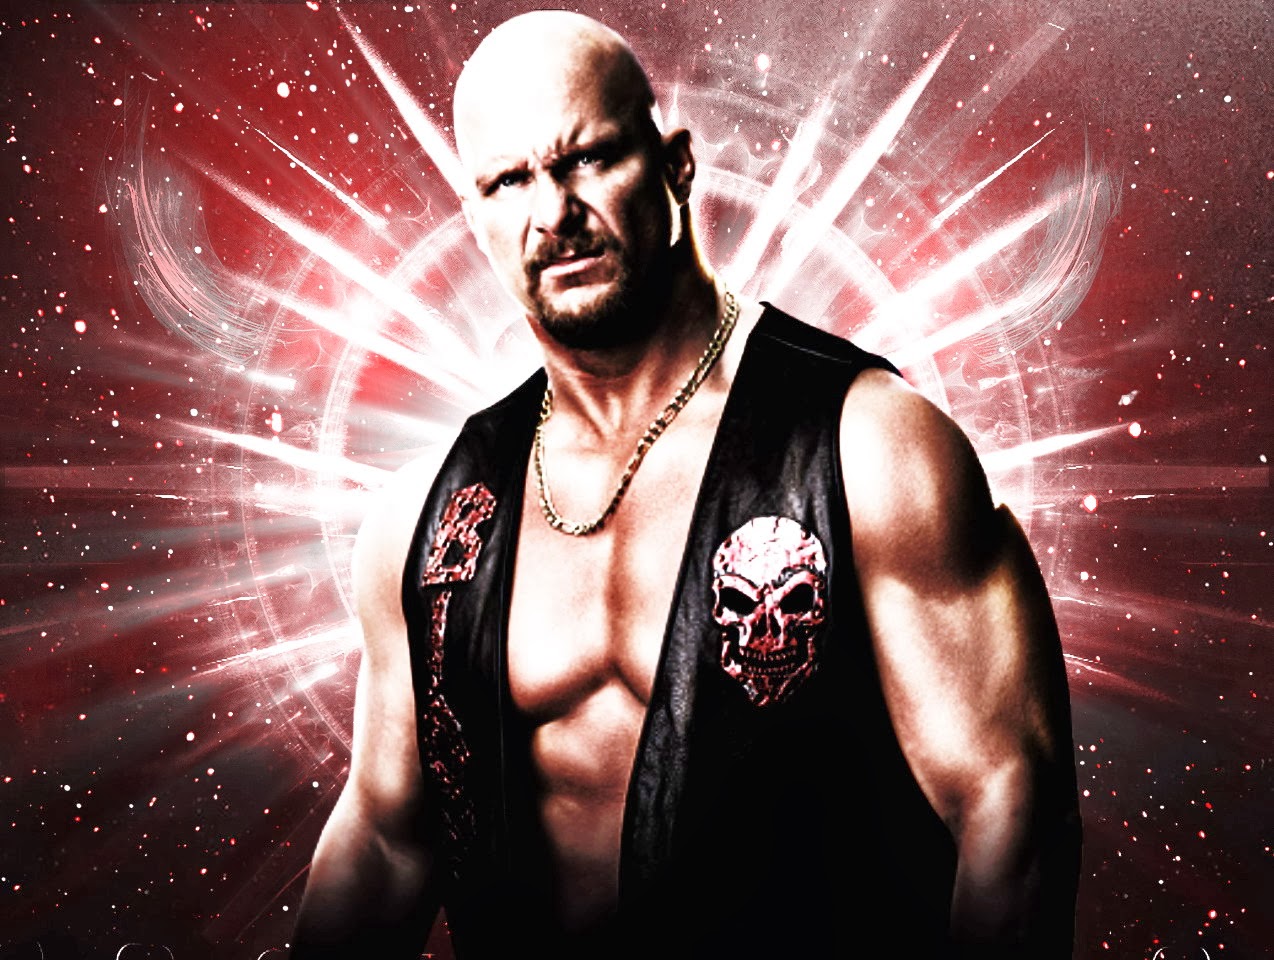 stone cold steve austin wallpapers stone cold steve austin wallpapers 1274x960